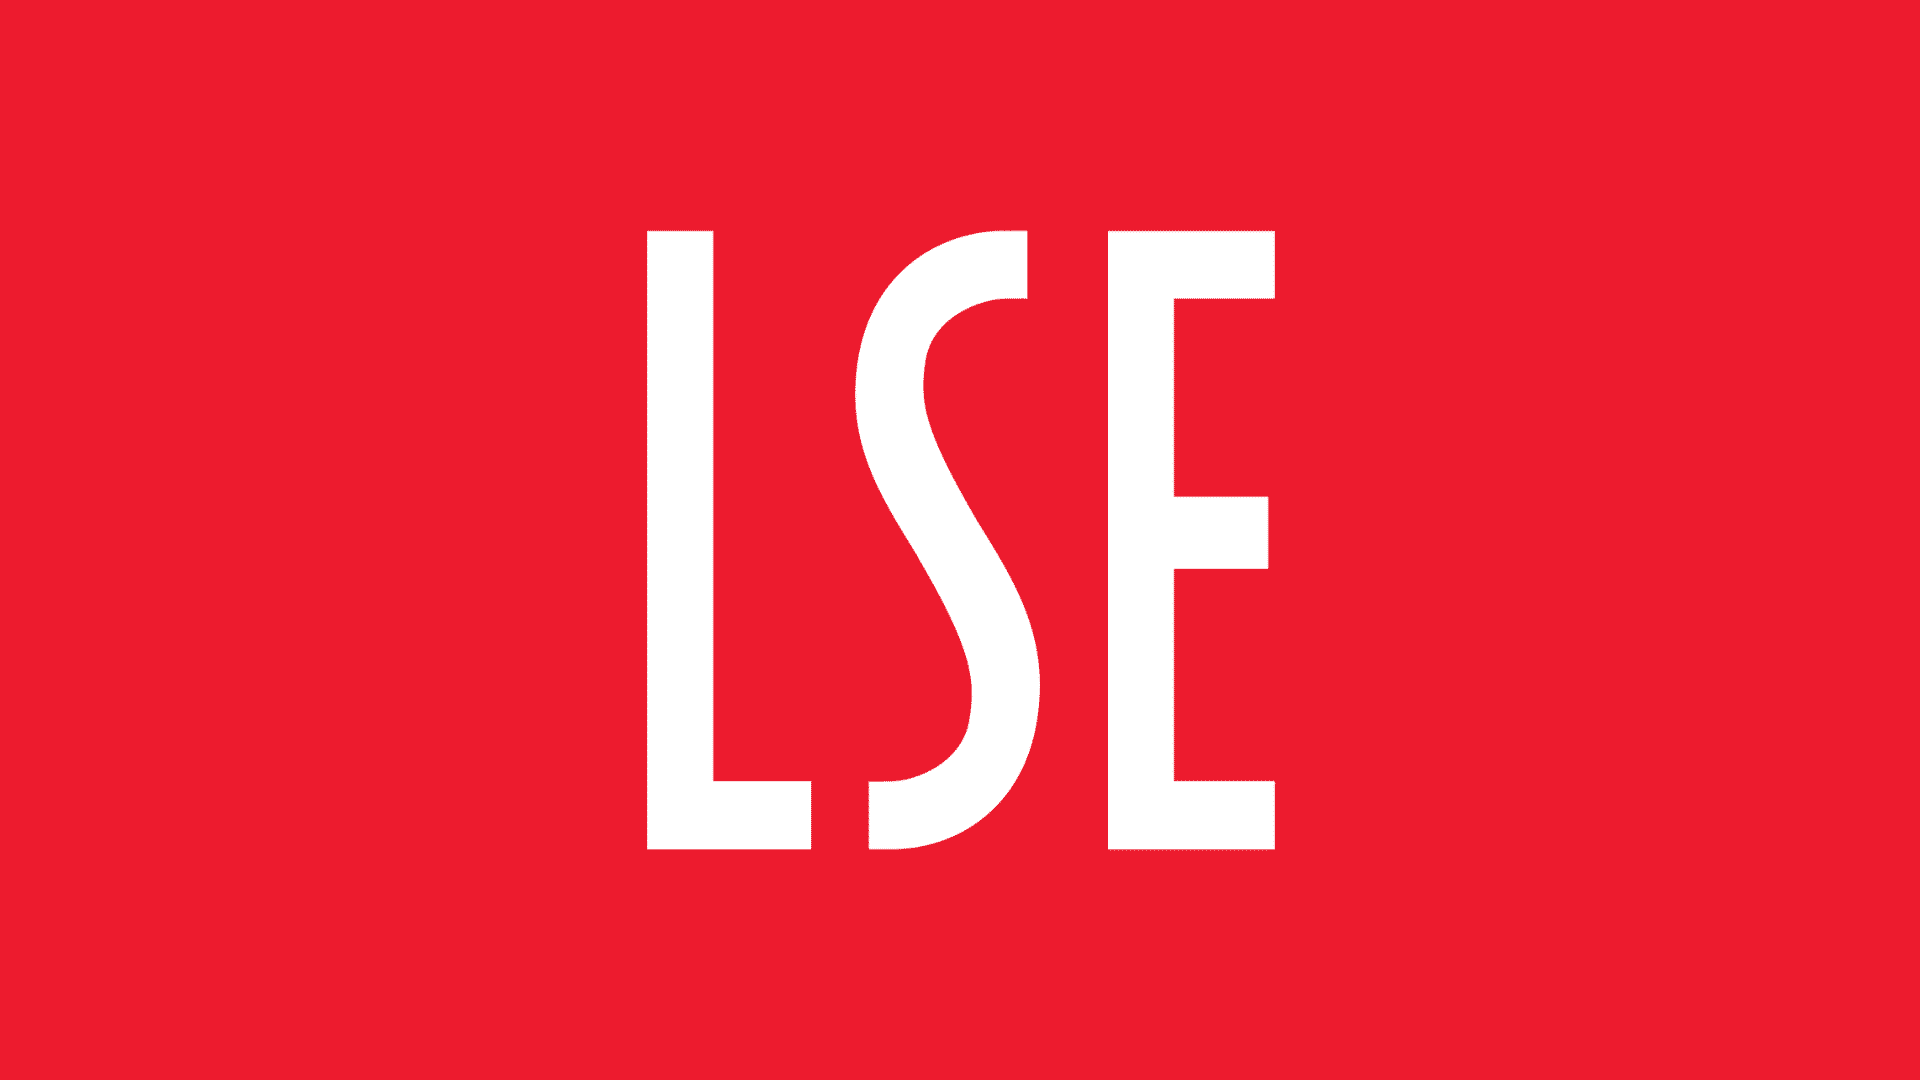 MBA Essentials Programme at LSE